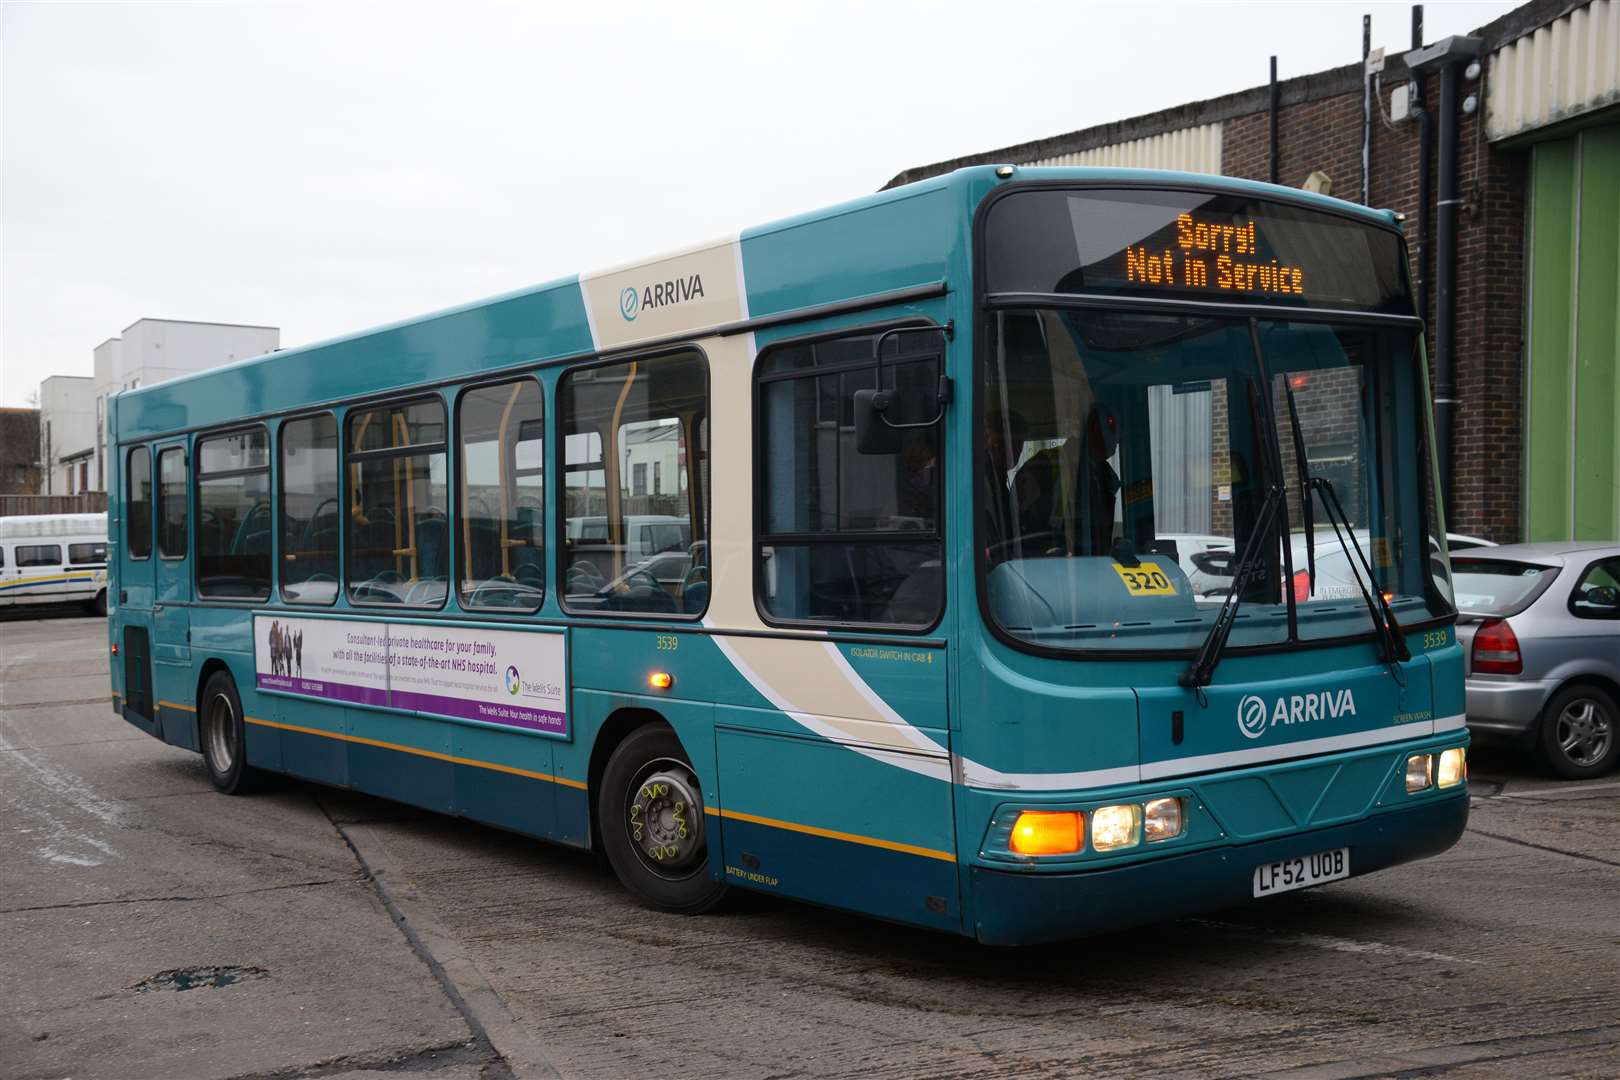 Arriva has announced some disruption to its services in Aylesford